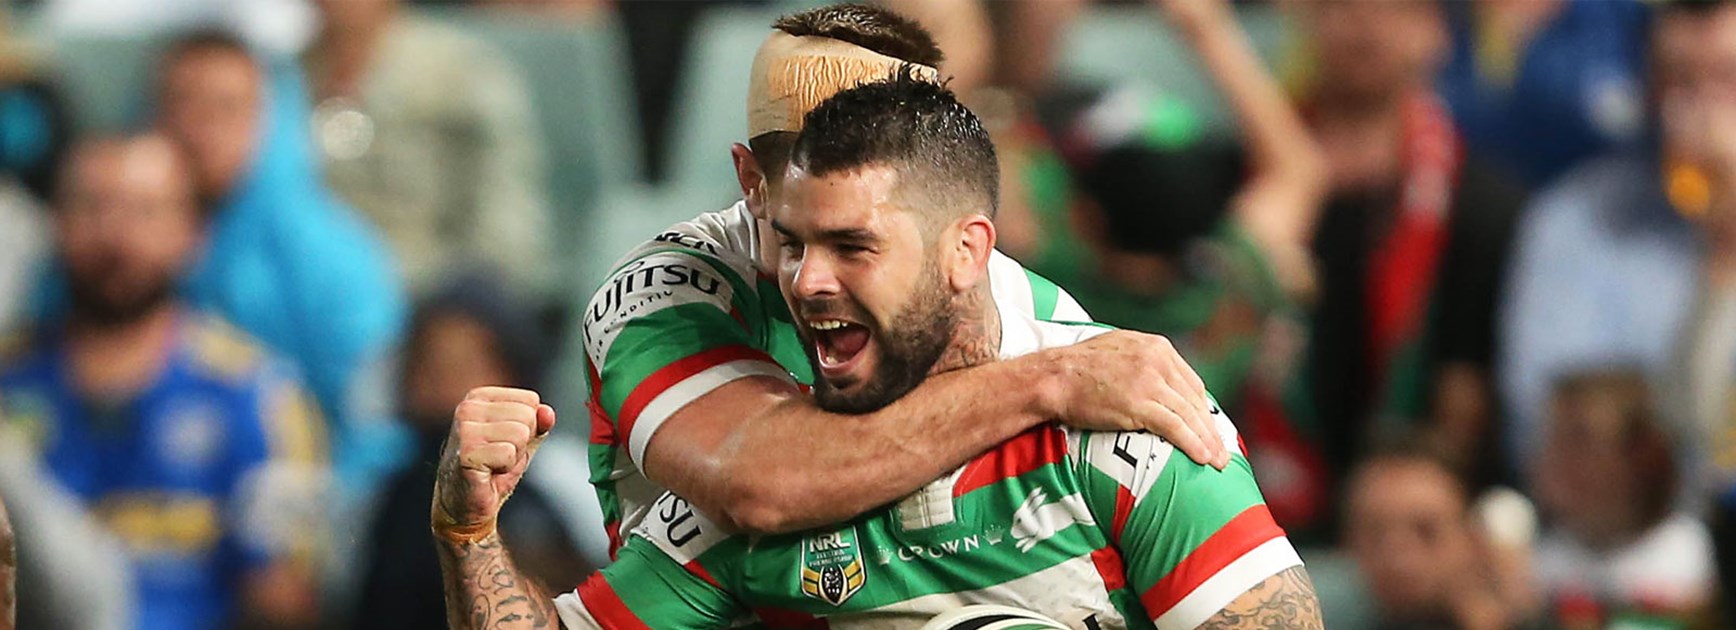 Adam Reynolds celebrates during South Sydney's Round 10 win over the Eels.